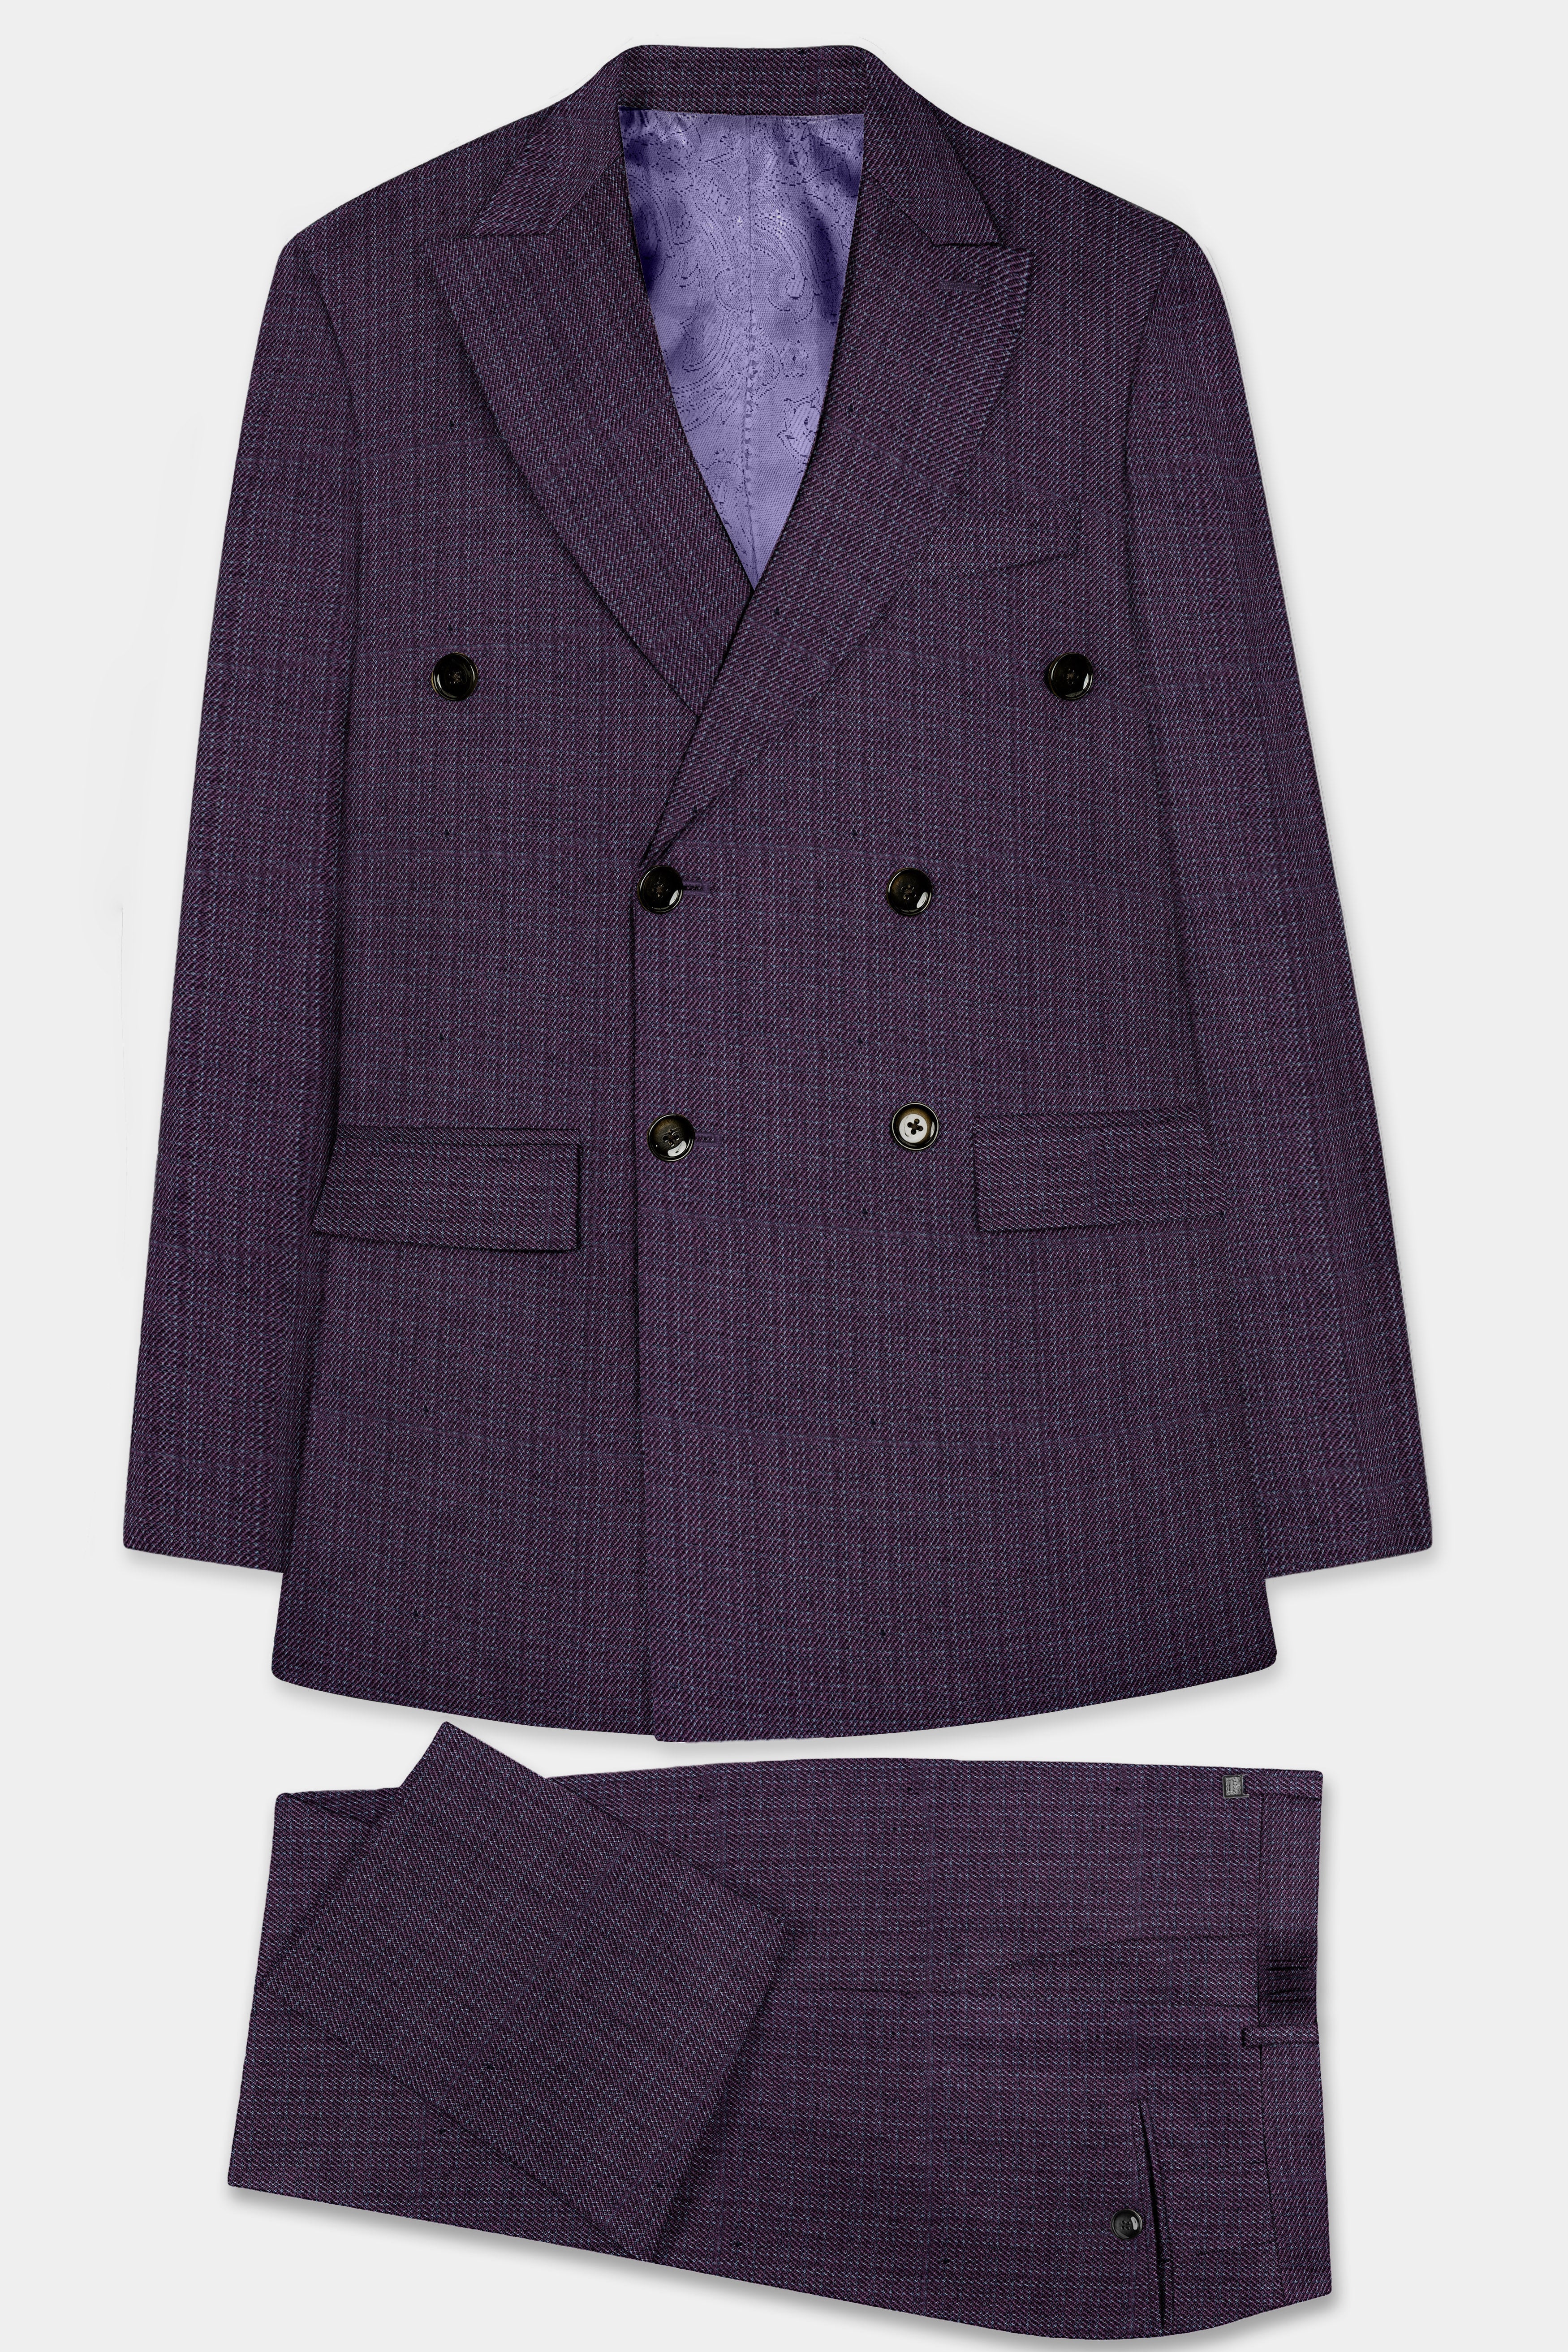 Blackcurrant Textured Wool Rich Double Breasted Suit